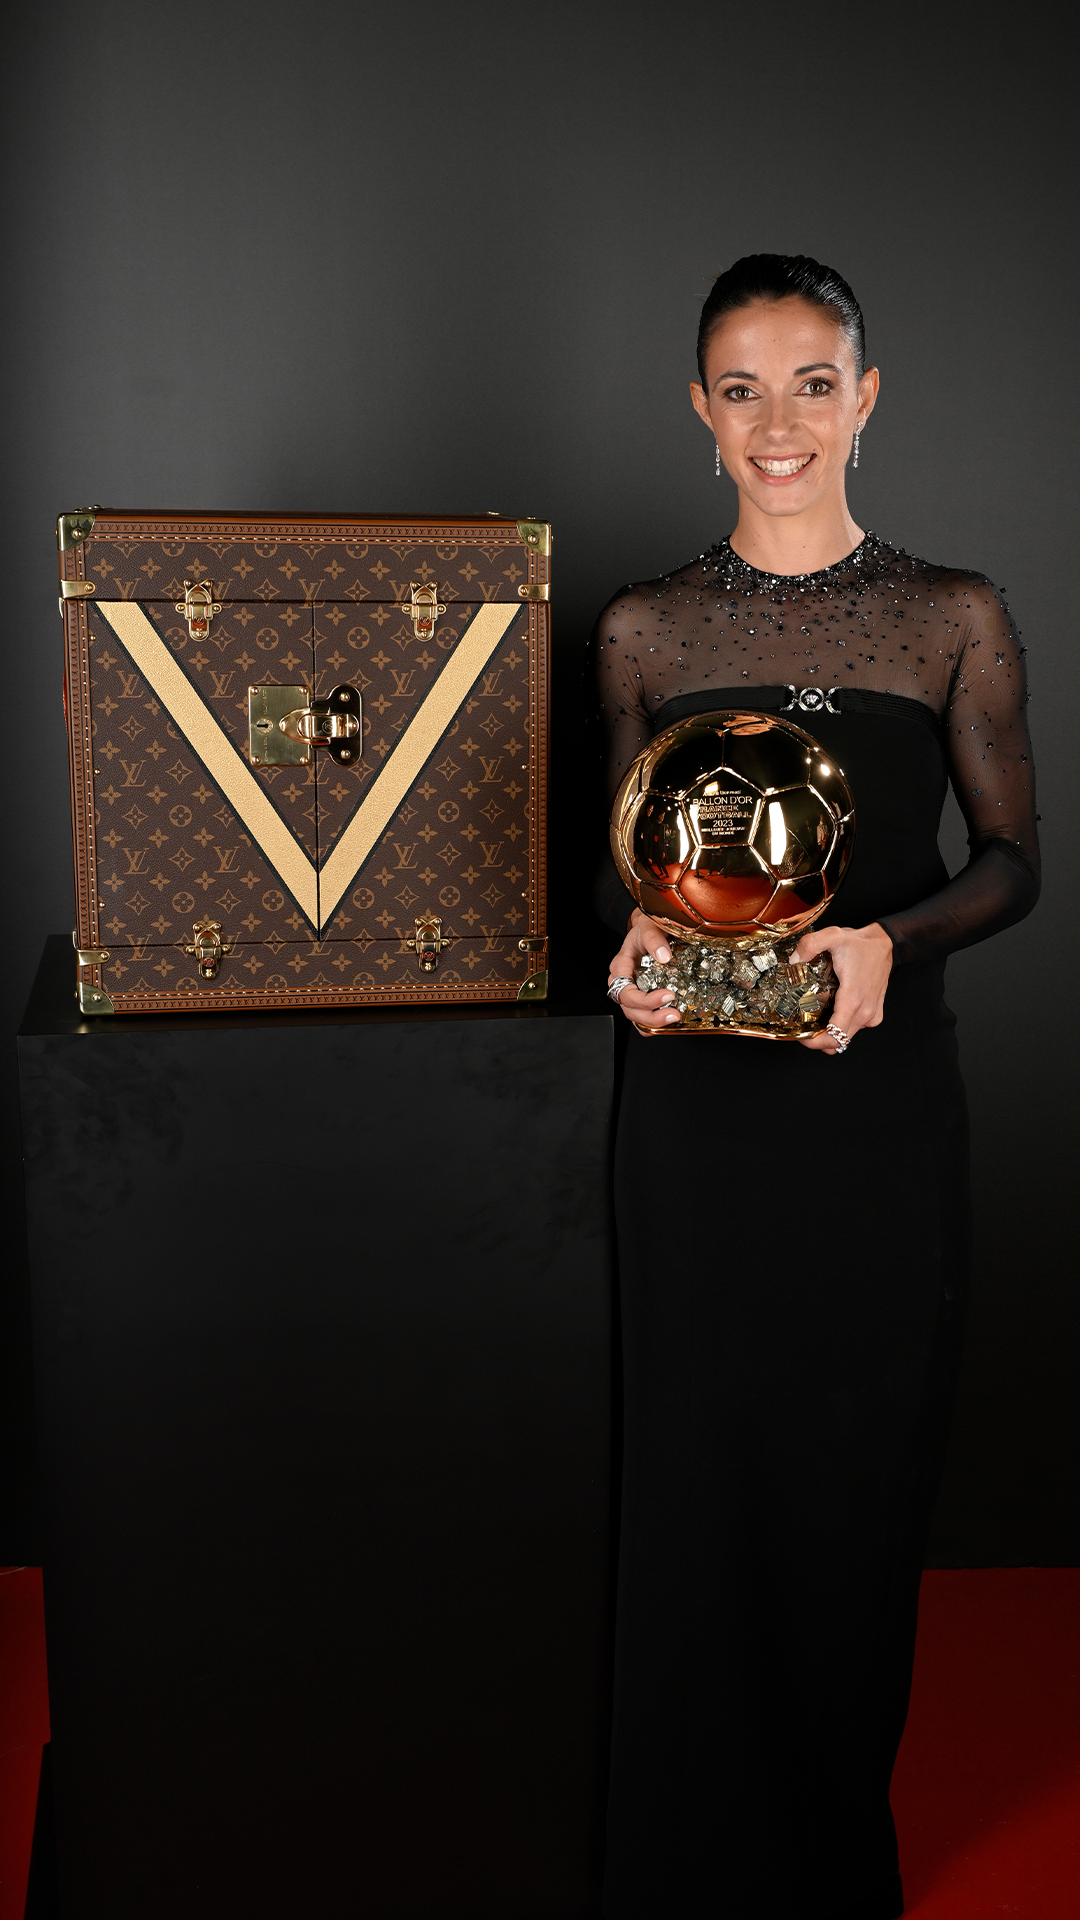 Aitana Bonmatí, radiant beside the Louis Vuitton case, wearing a dress as dazzling as her year in football.